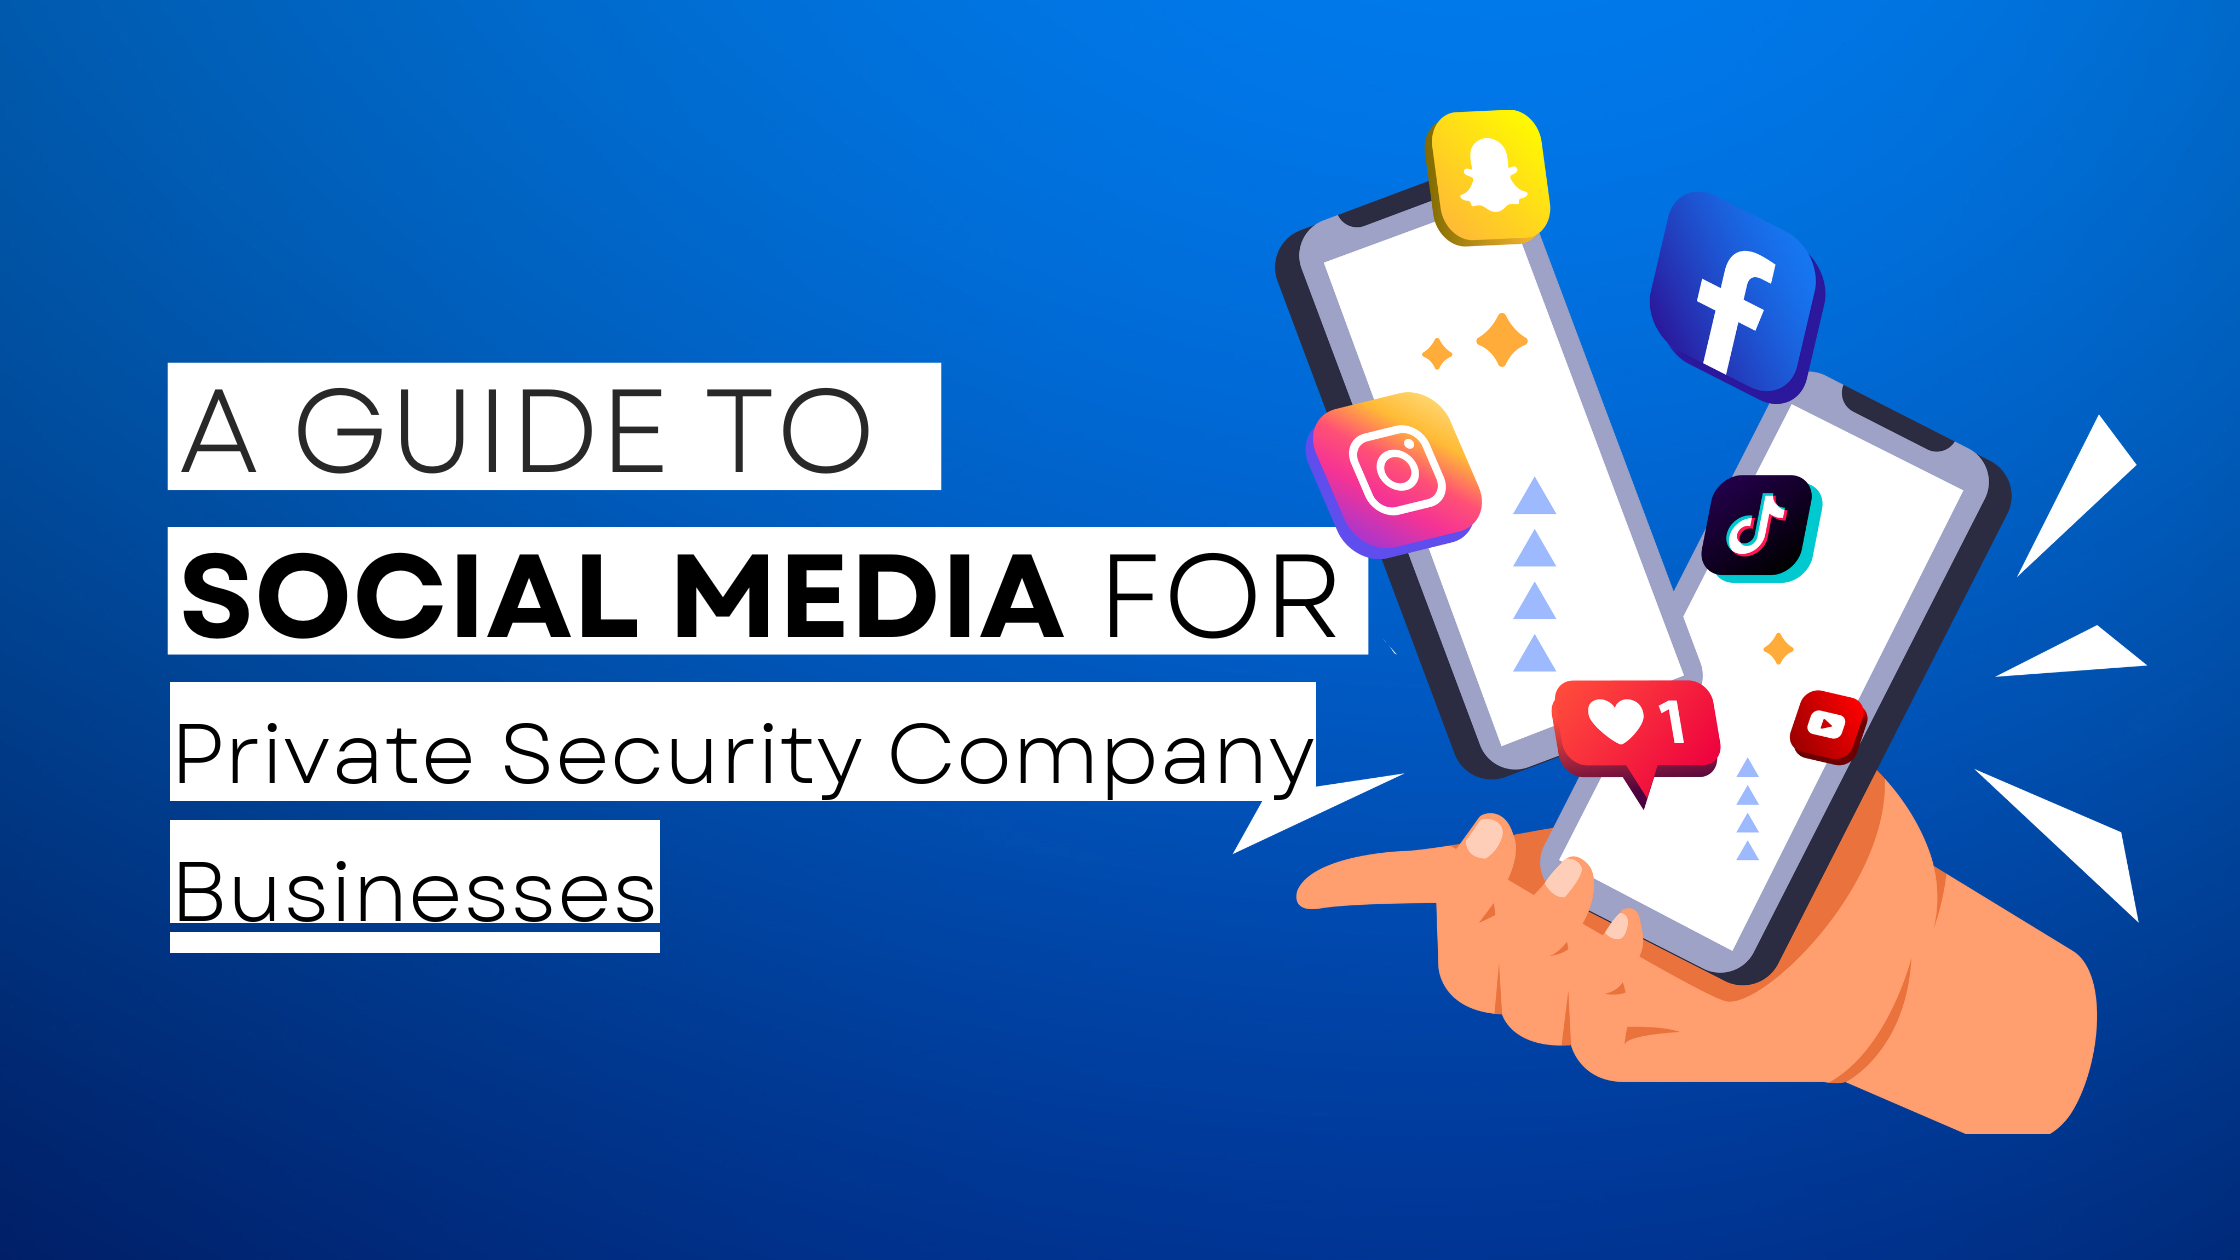 How to start Private Security Company on social media